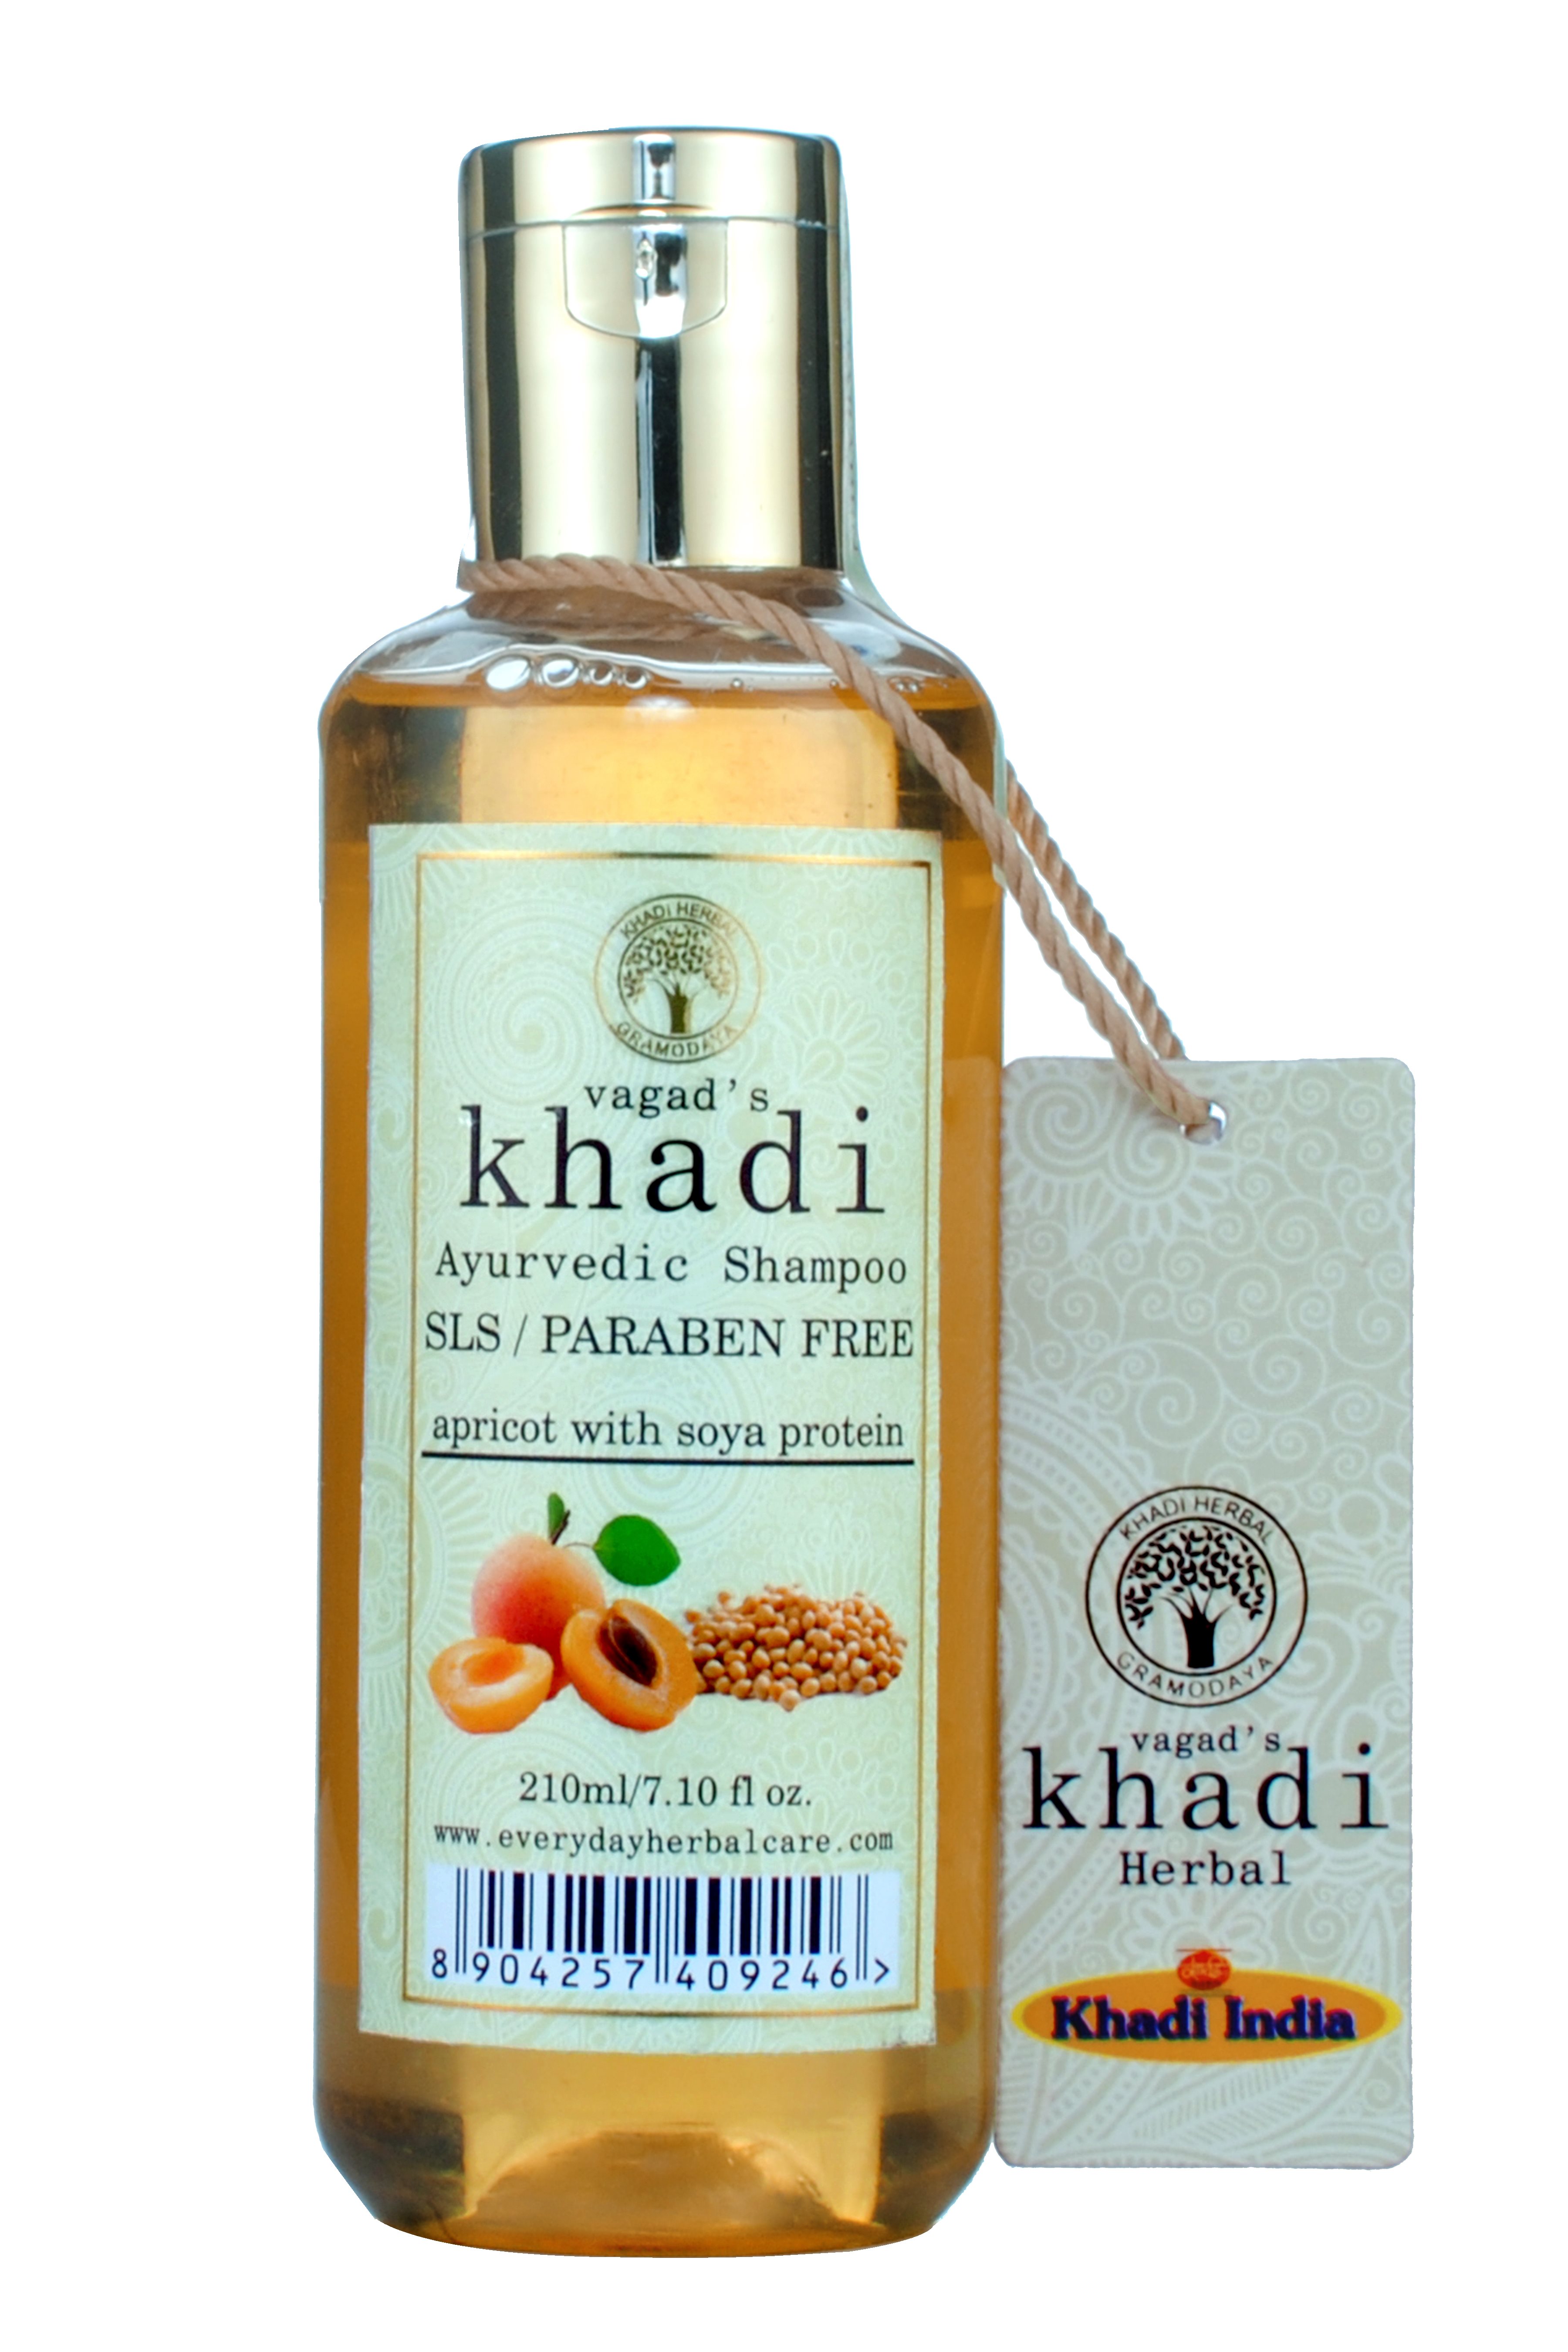 Buy Vagad's Khadi S.L.S And Paraben Free Apricot With Soya Protein Shampoo at Best Price Online